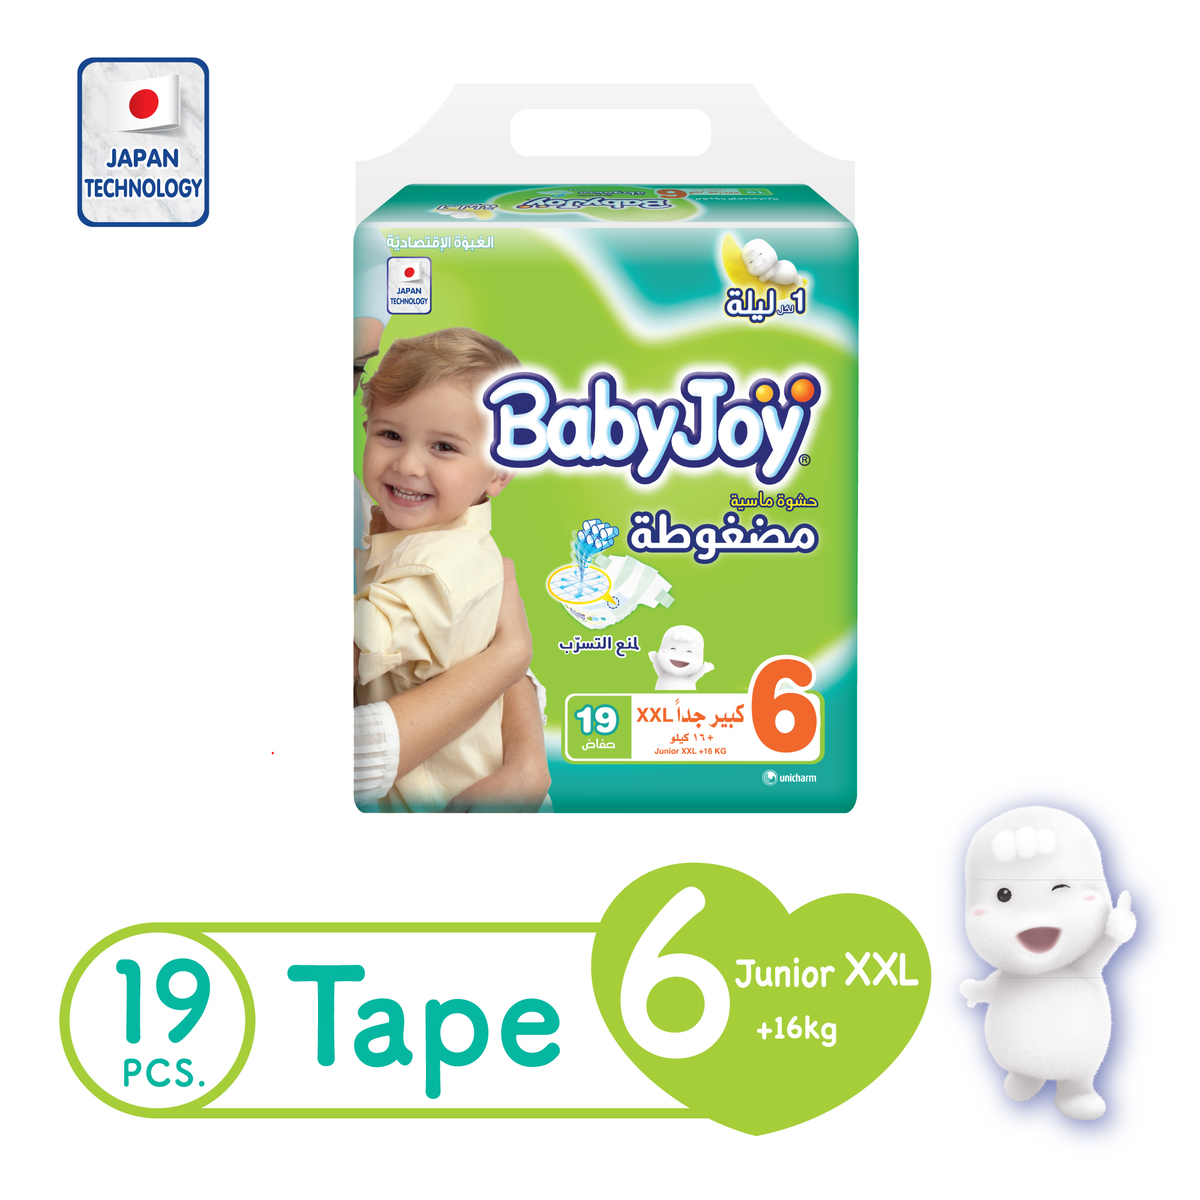 BabyJoy Compressed Tape Diaper Size 6 XXL Value Pack 16+kg 19 Count